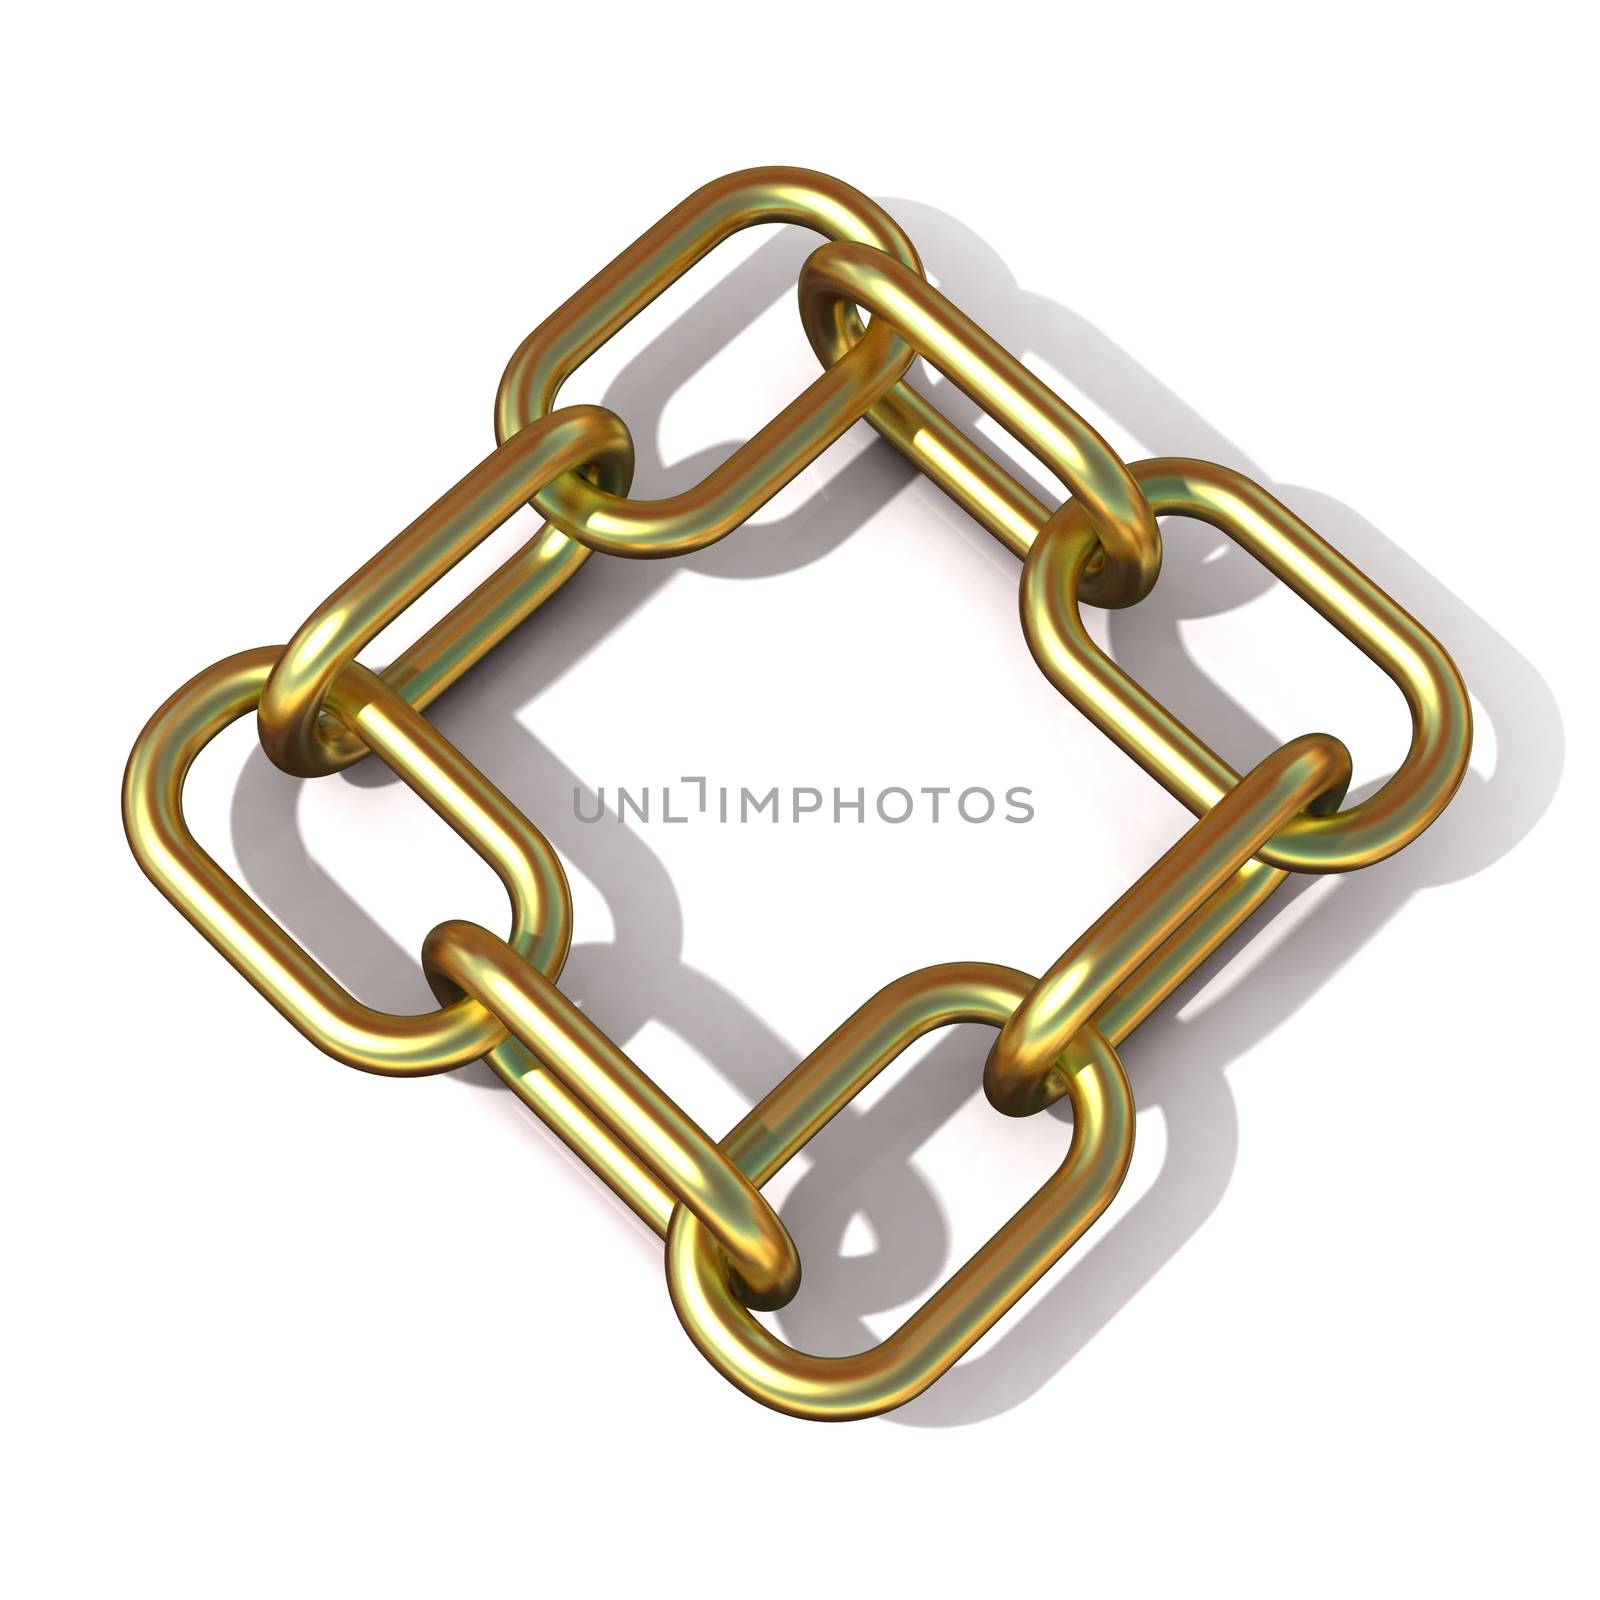 Abstract 3D illustration of a brass chain link isolated on white background. Top view